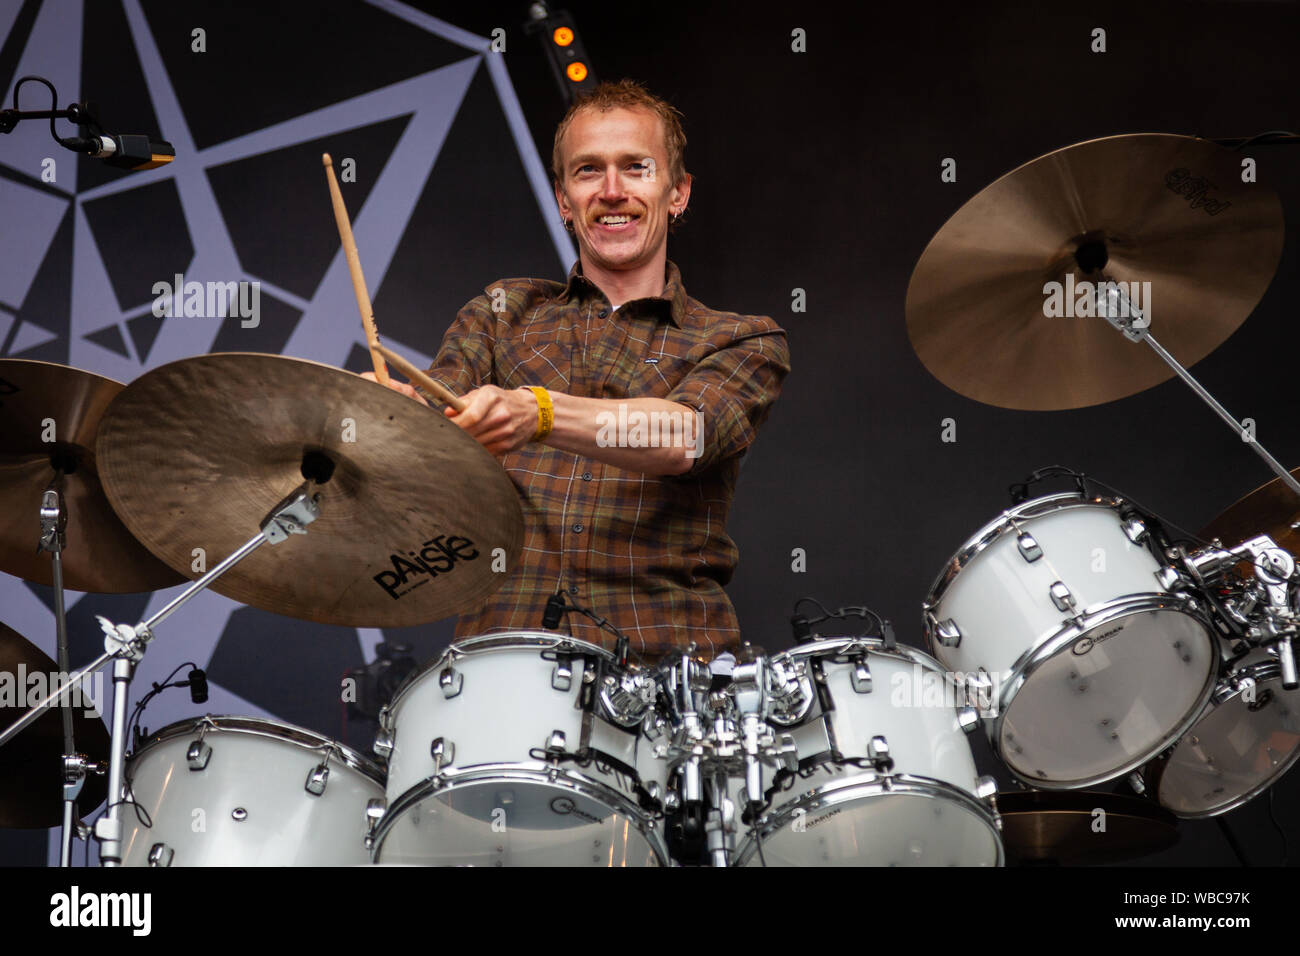 Trondheim, Norway. 3rd, June 2018. The Norwegian blues rock band Spidergawd performs a live concert during the Norwegian music festival Trondheim Rocks 2018 in Trondheim. Here drummer Kenneth Kapstad is seen live on stage. (Photo credit: Gonzales Photo - Tor Atle Kleven). Stock Photo